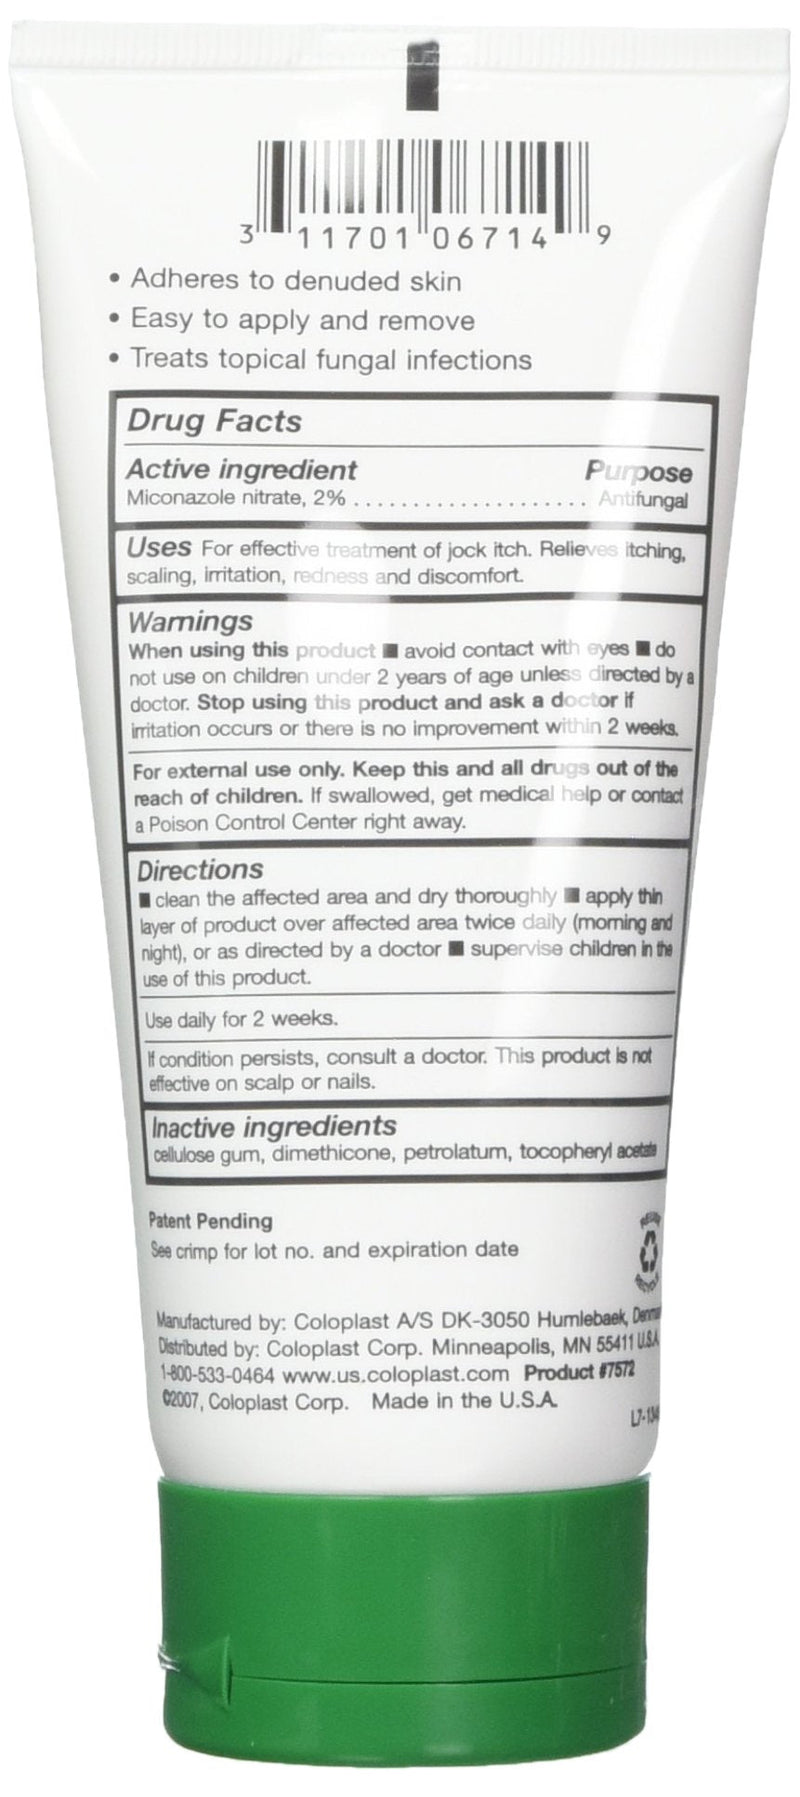 [Australia] - Critic-Aid Clear Antifungal Moisture Barrier Ointment - 5 Ounce Tube - Pack of 2 